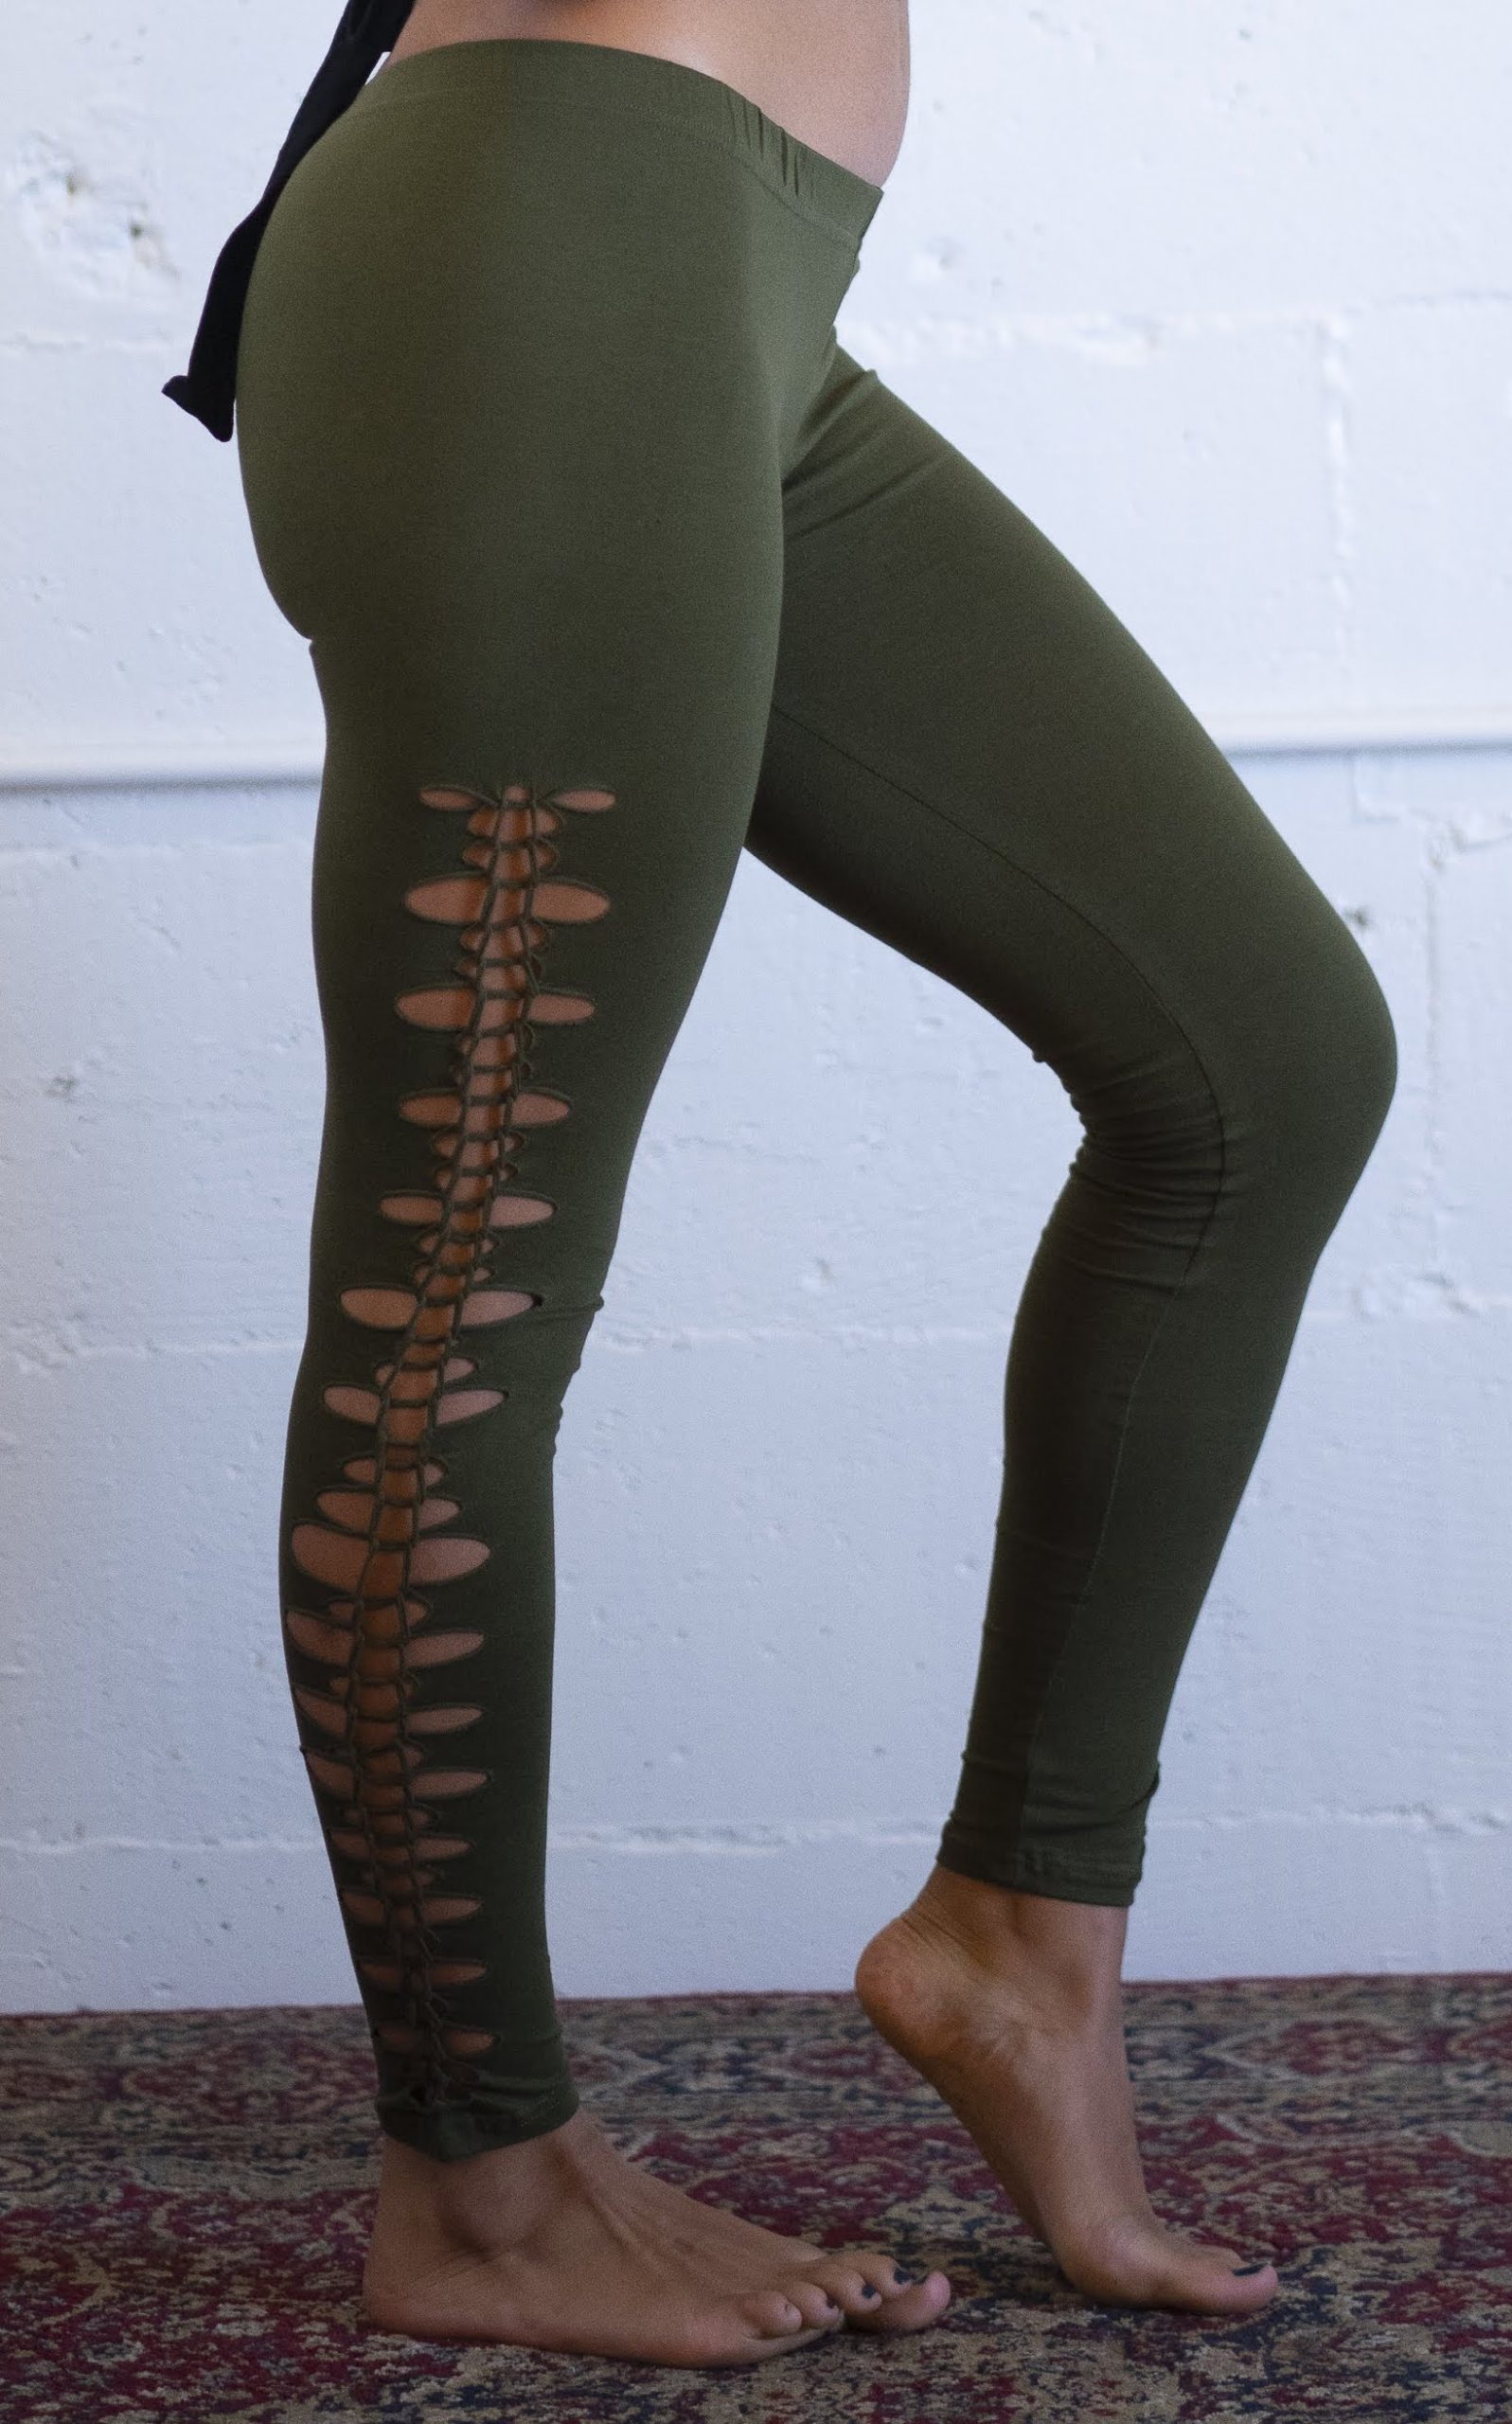 Indelicate Clothing - Fire up your Monday morning with our Perfect Pino  Braided Leggings ❤️ Our braided leggings are 100% handmade here in Jozi -  you won't find anything like them anywhere